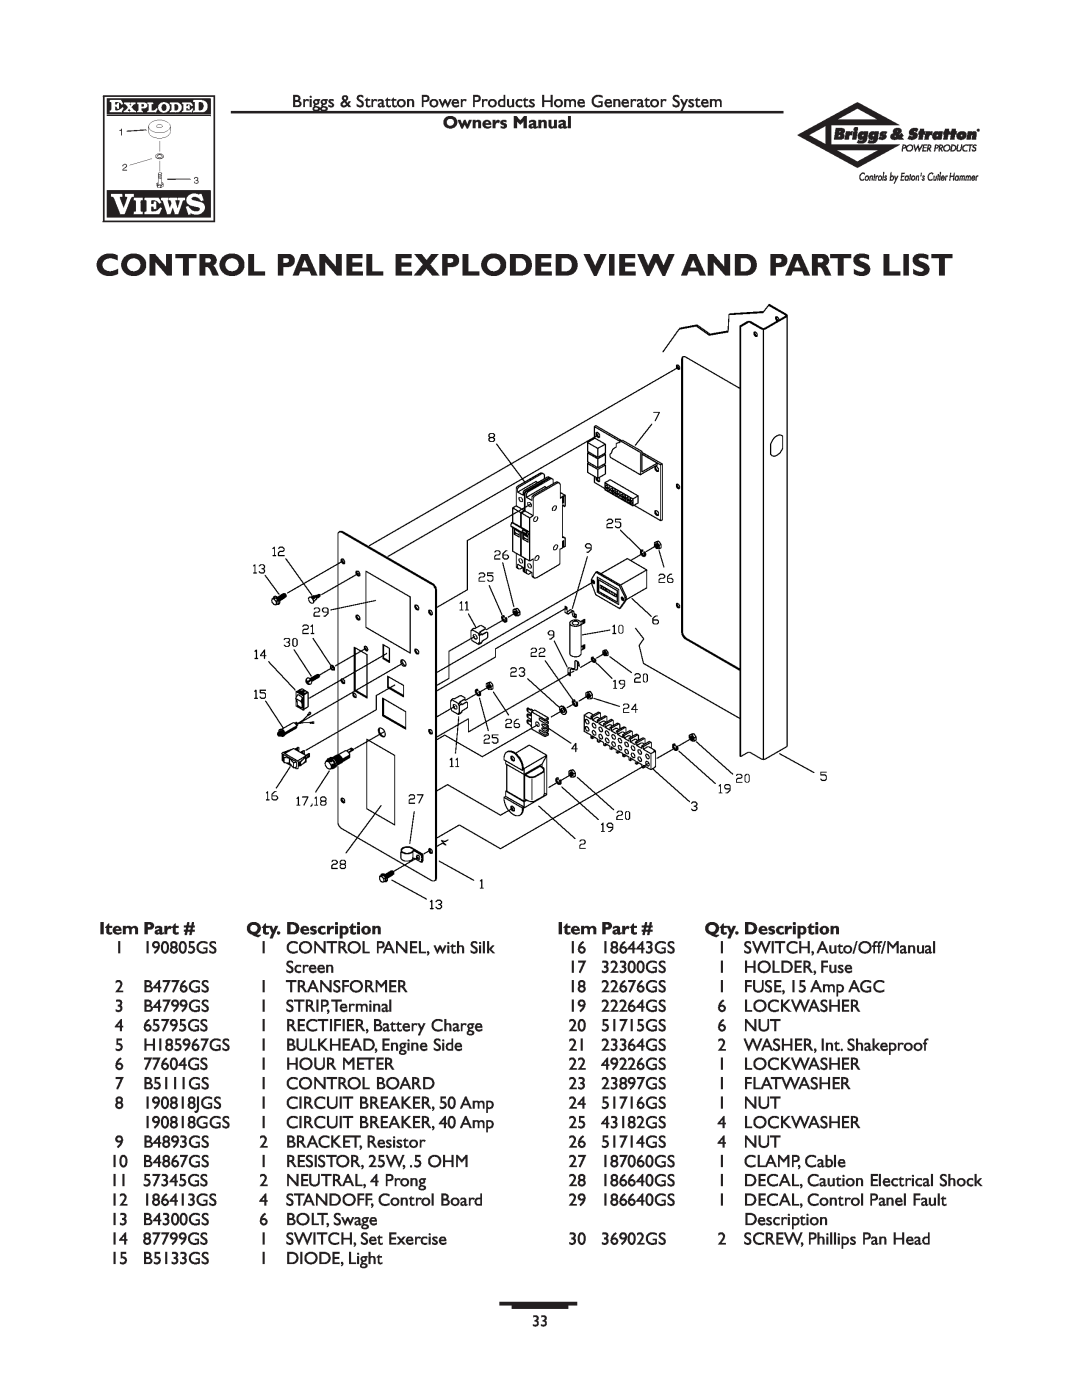 Briggs & Stratton 190839GS owner manual Control Panel Exploded View And Parts List, Owners Manual, Qty. Description 